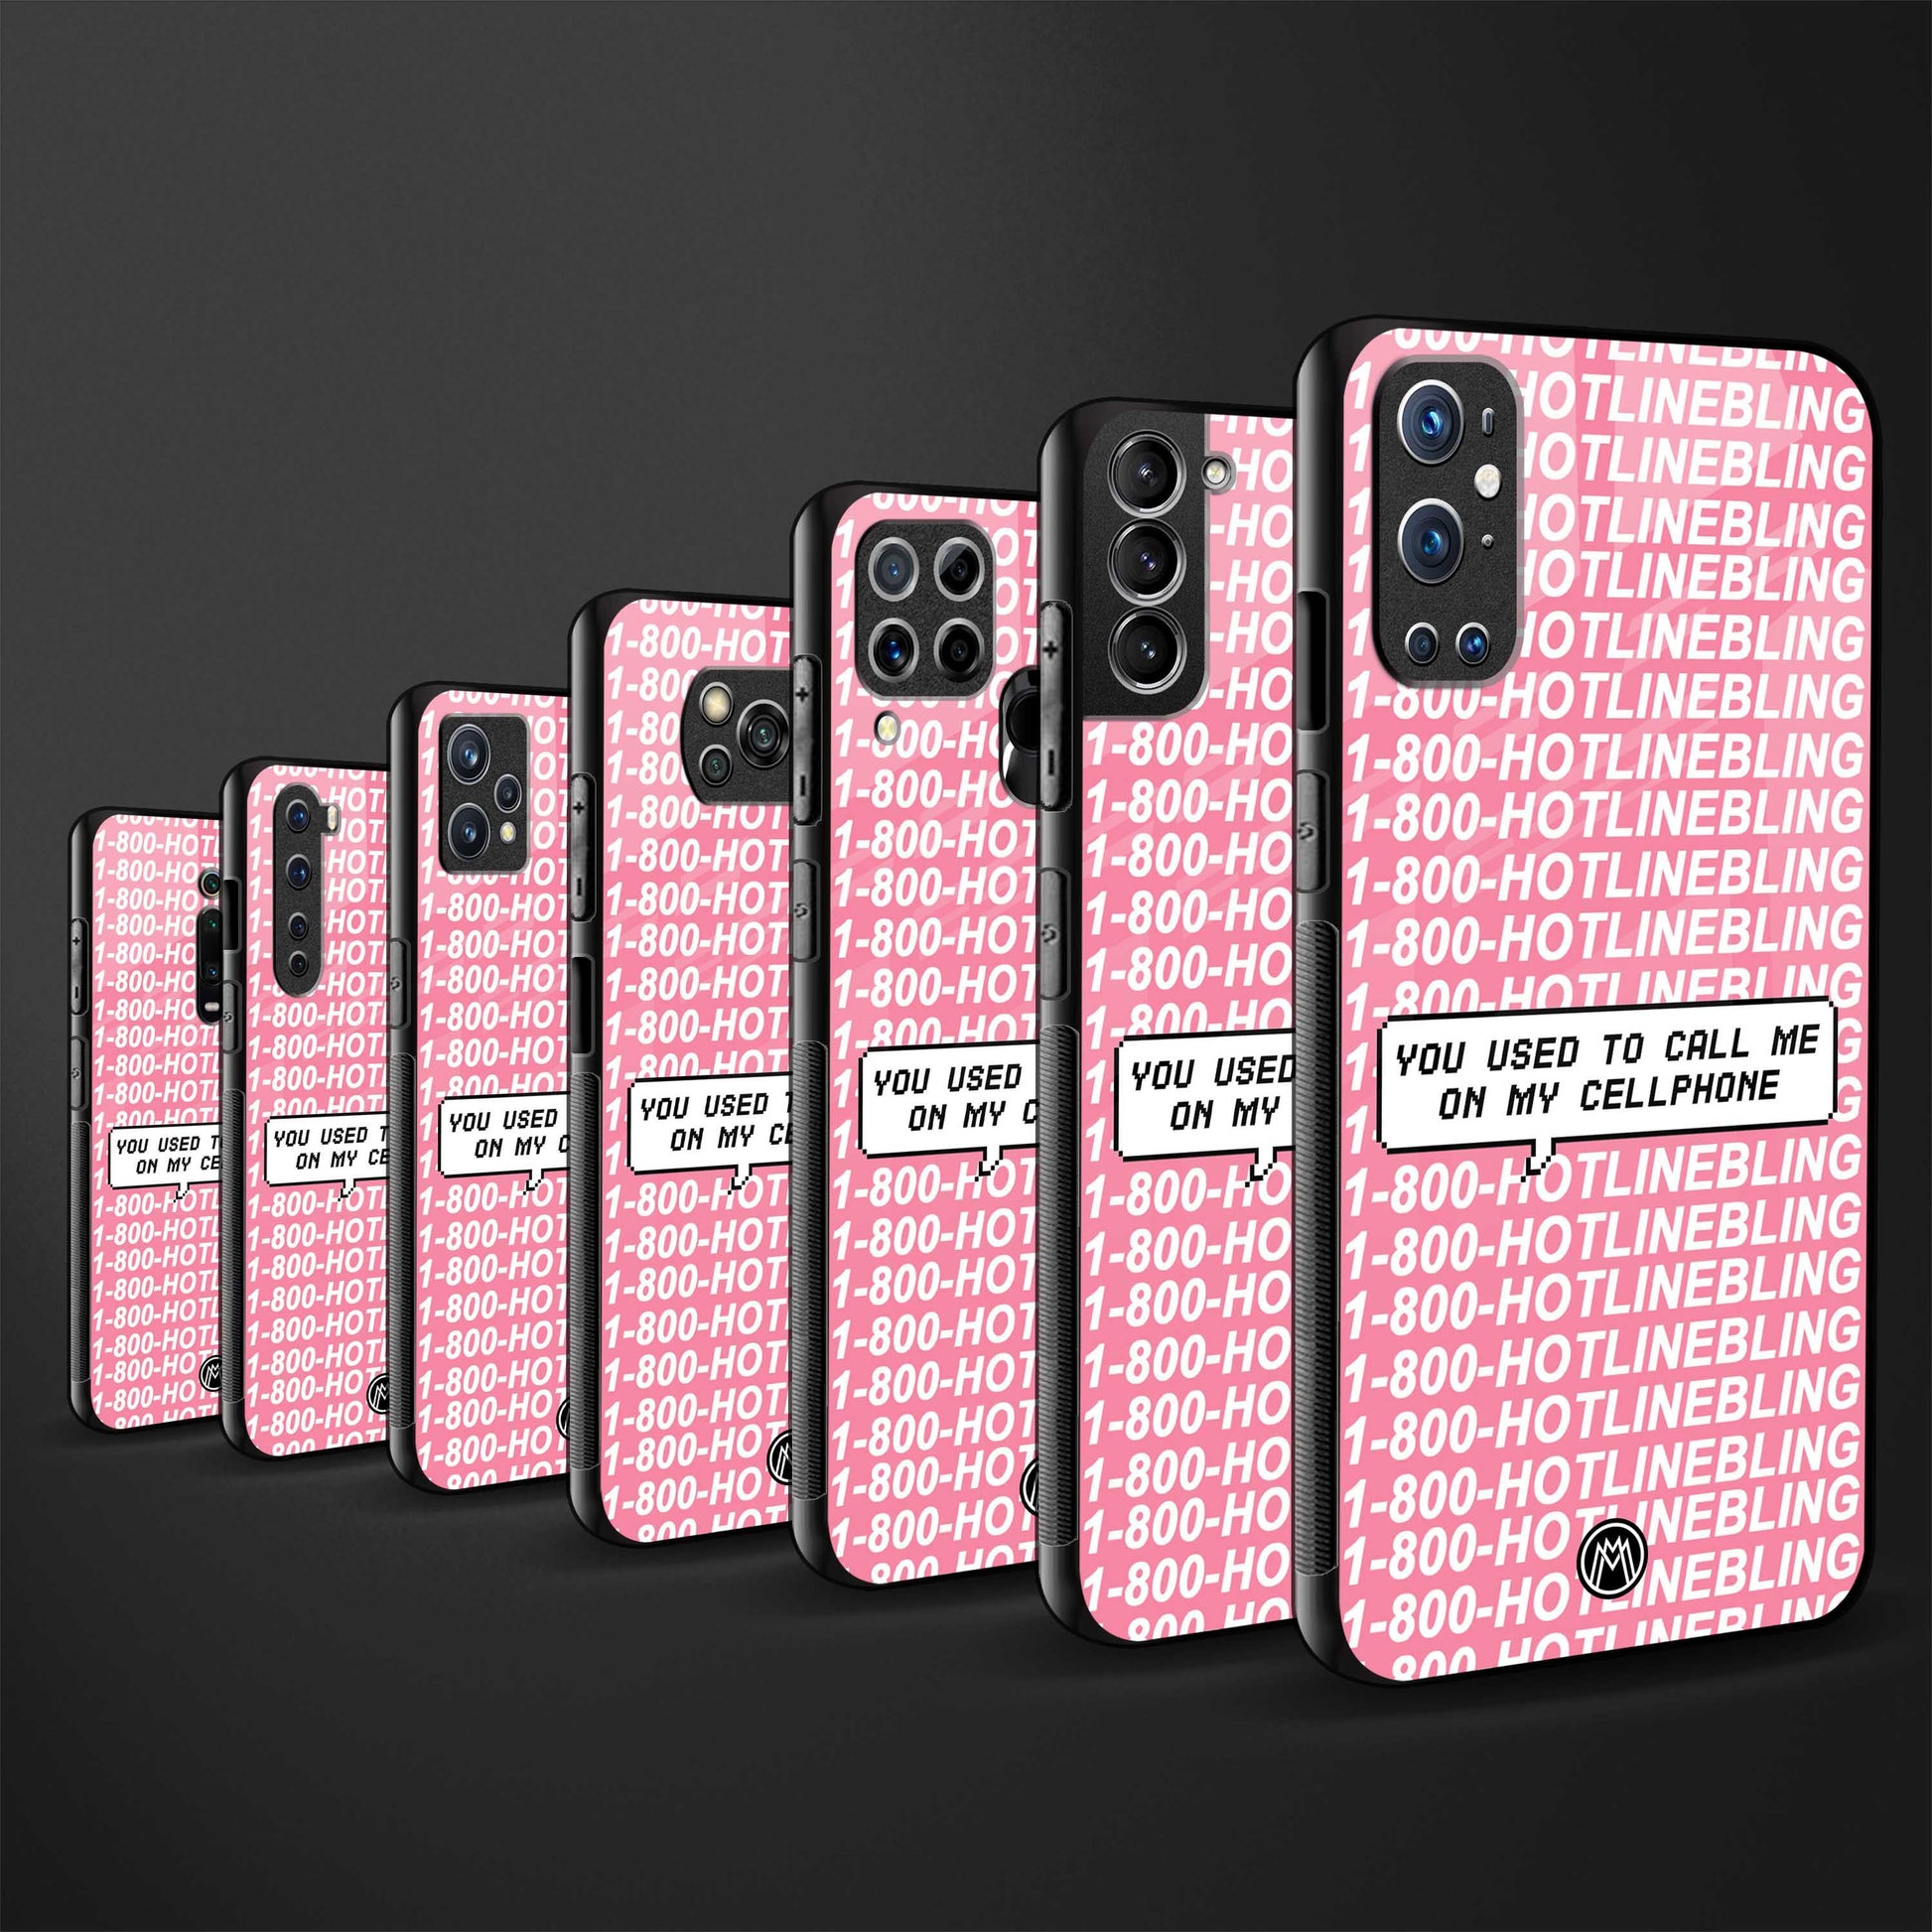 1800 hotline bling phone cover for vivo y21t 